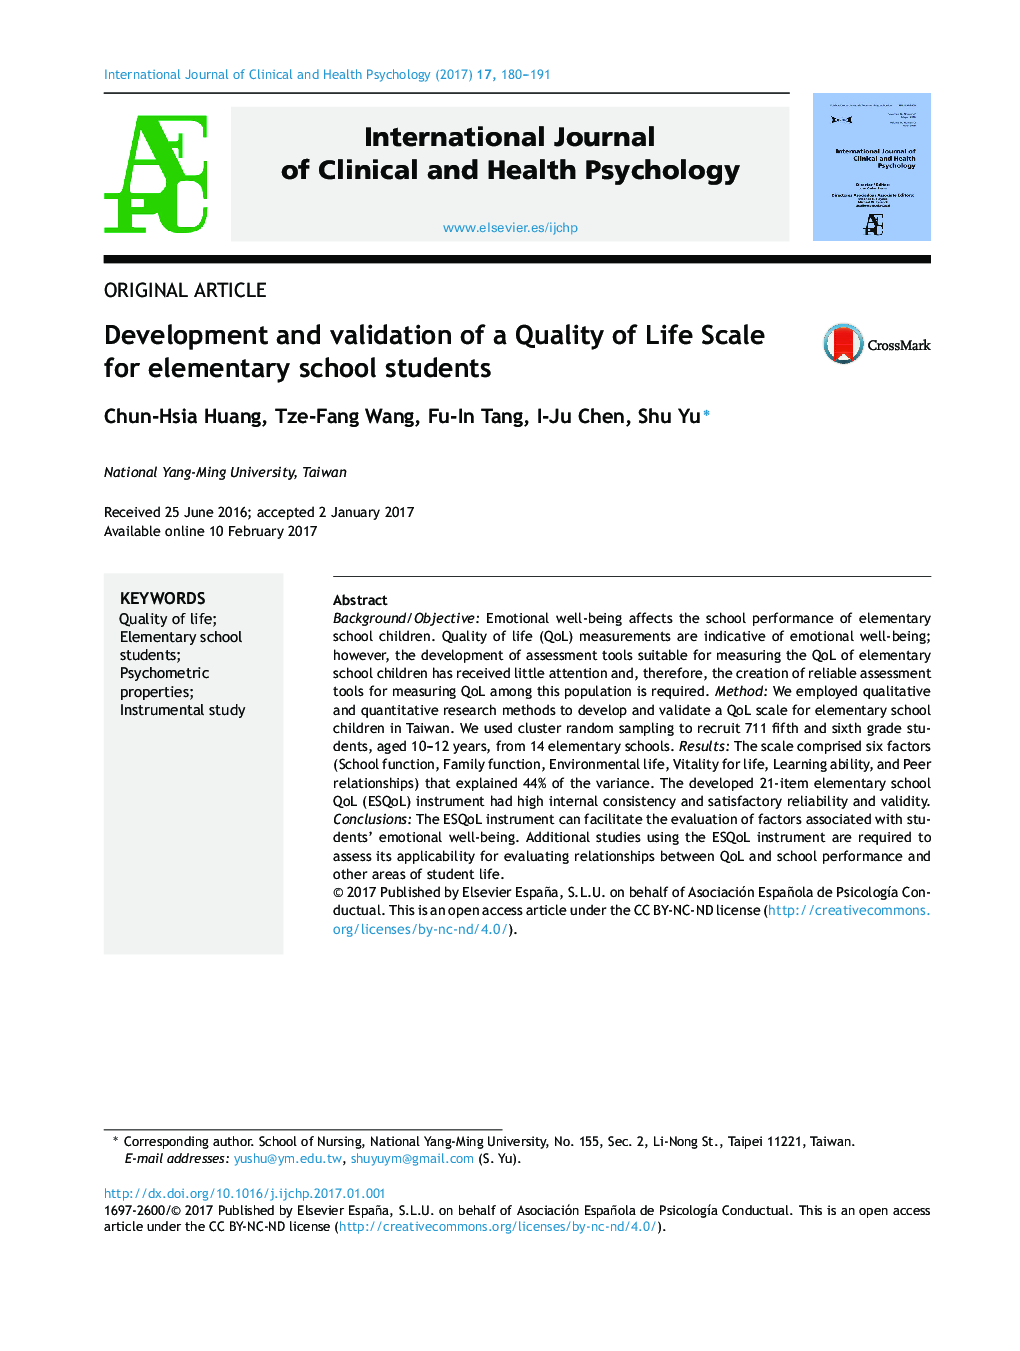 Development and validation of a Quality of Life Scale for elementary school students